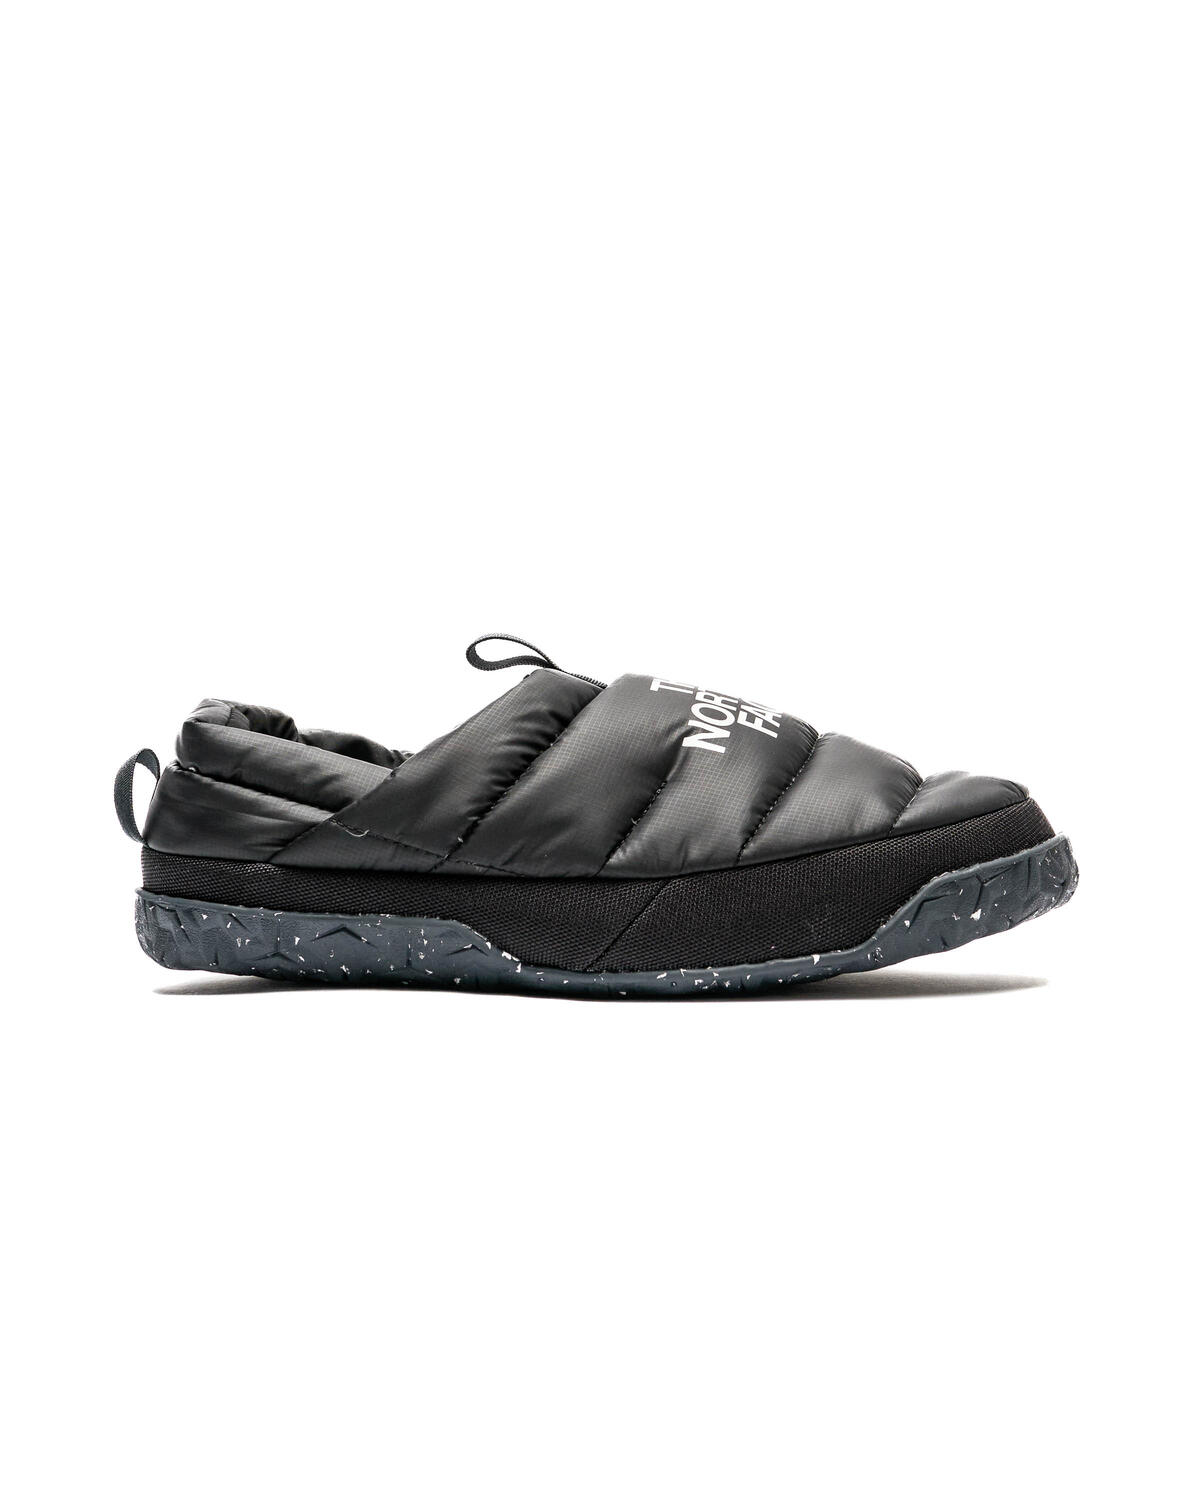 The North Face Nuptse Mule | NF0A5G2FKY41 | AFEW STORE